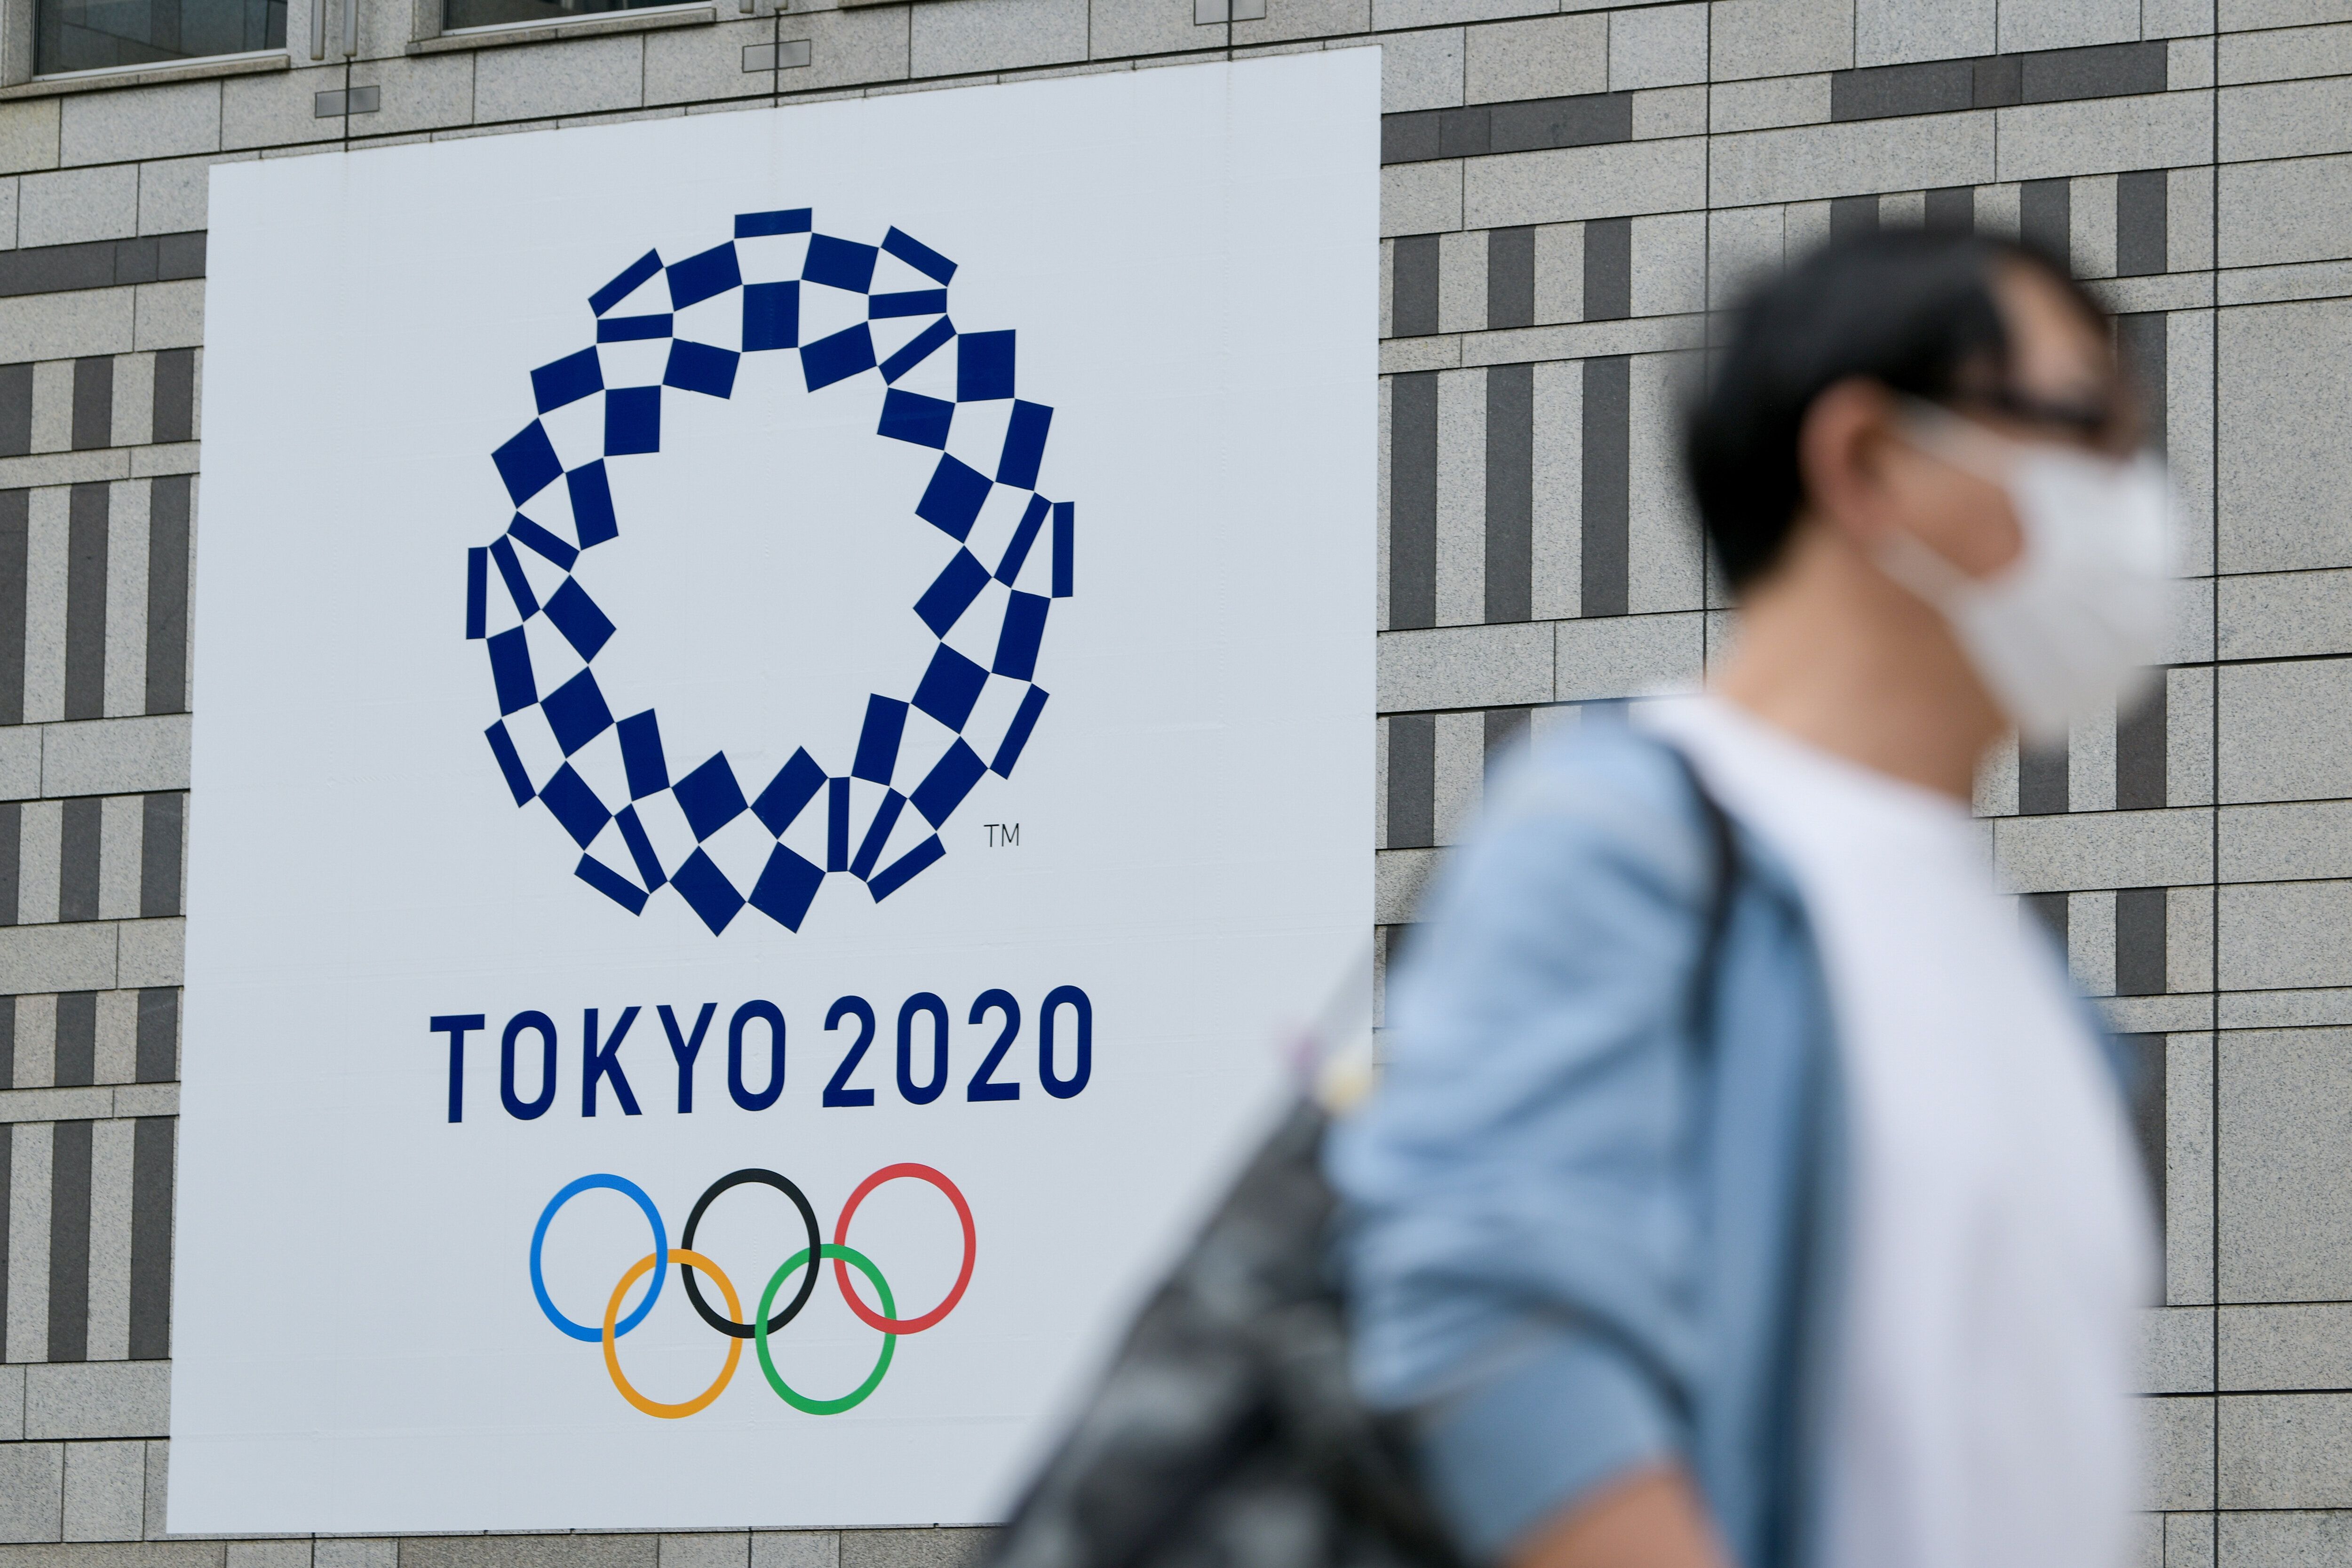 A man walks past a Tokyo 2020 banner on a building in Shinjuku area of Tokyo.